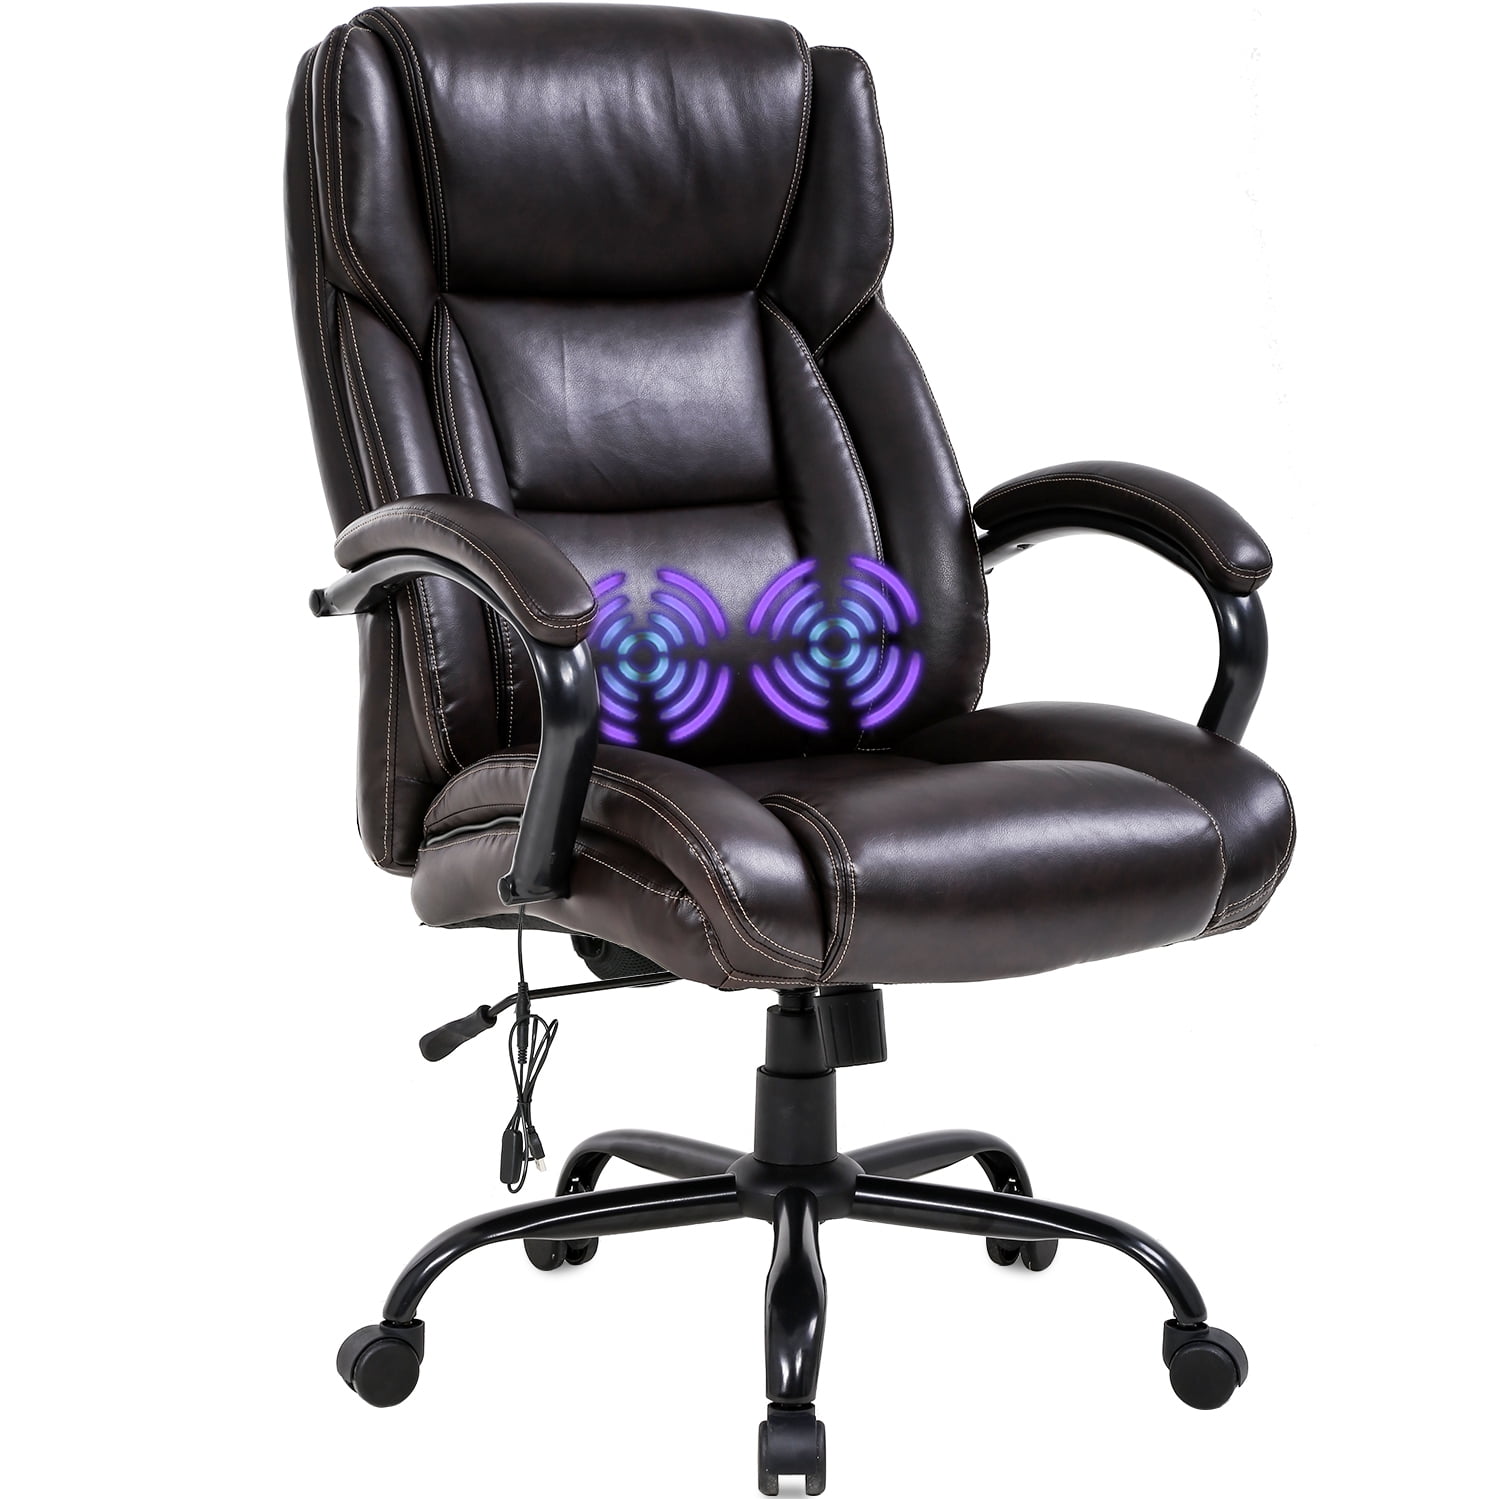 Black Bowthy Big and Tall Executive Office Chair 300lbs Computer Ergonomic Desk Chair 360 Swivel Task Chair with Wheels and Adjustable Lumbar Support High Back PU Leather Chair